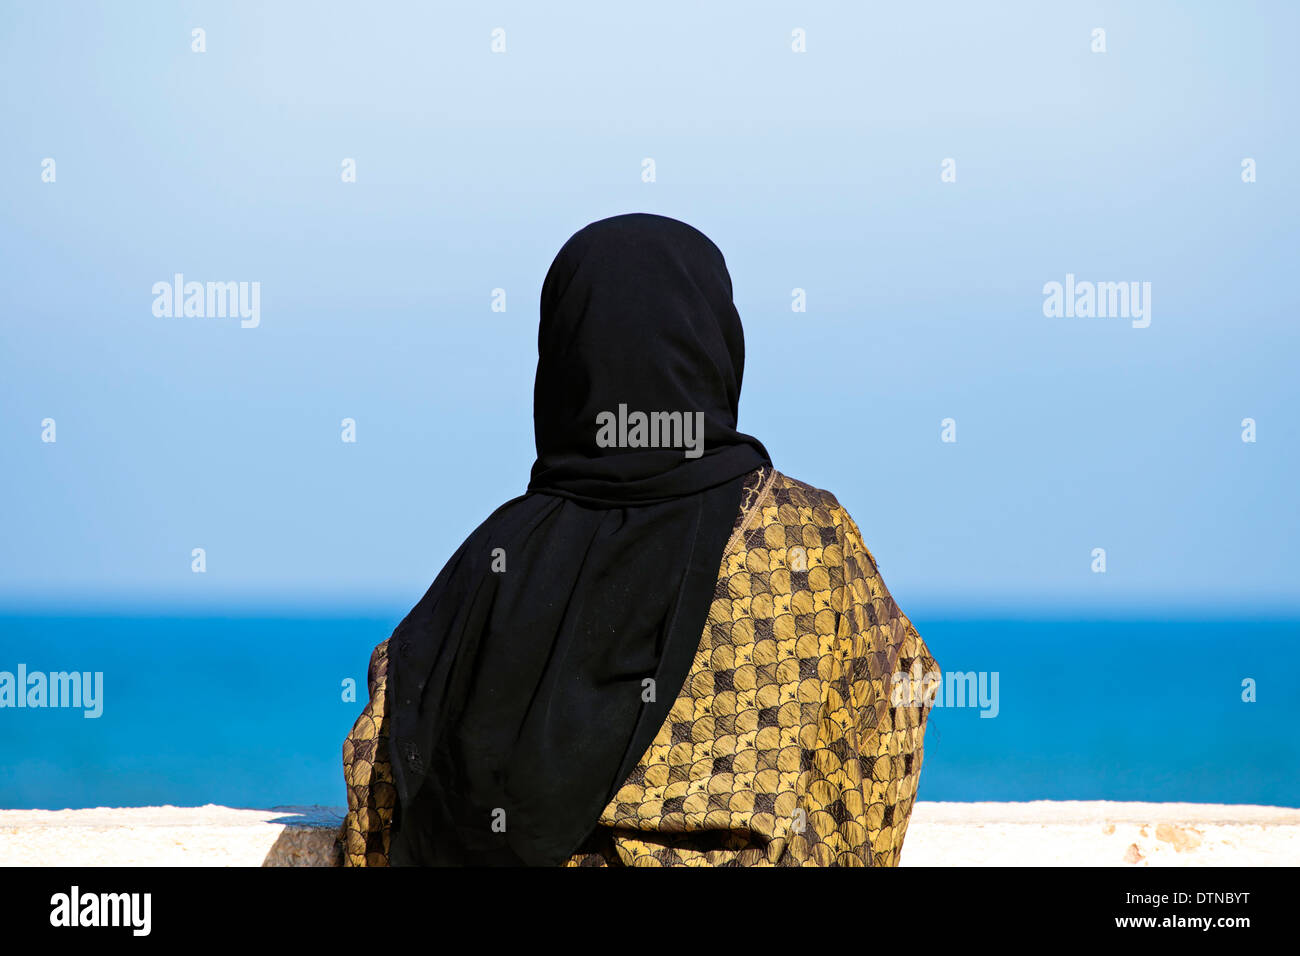 Arab woman with Islamic headscarf looking over the ocean Stock Photo